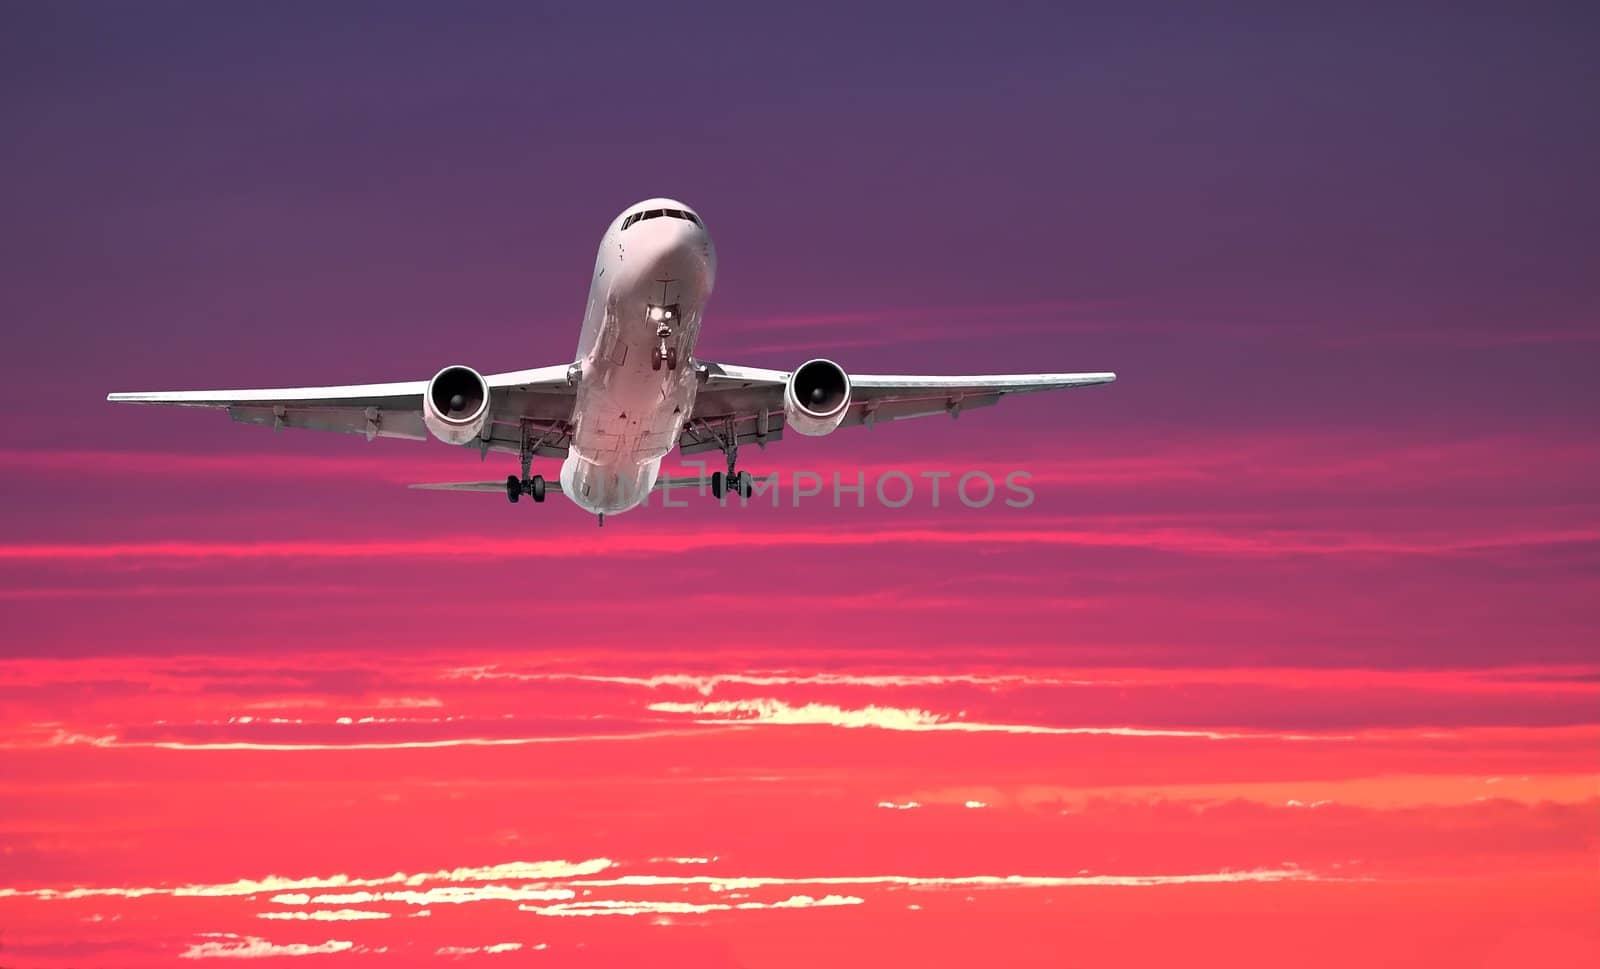 Widebody airliner on approach with colorful dramatic sky in the background